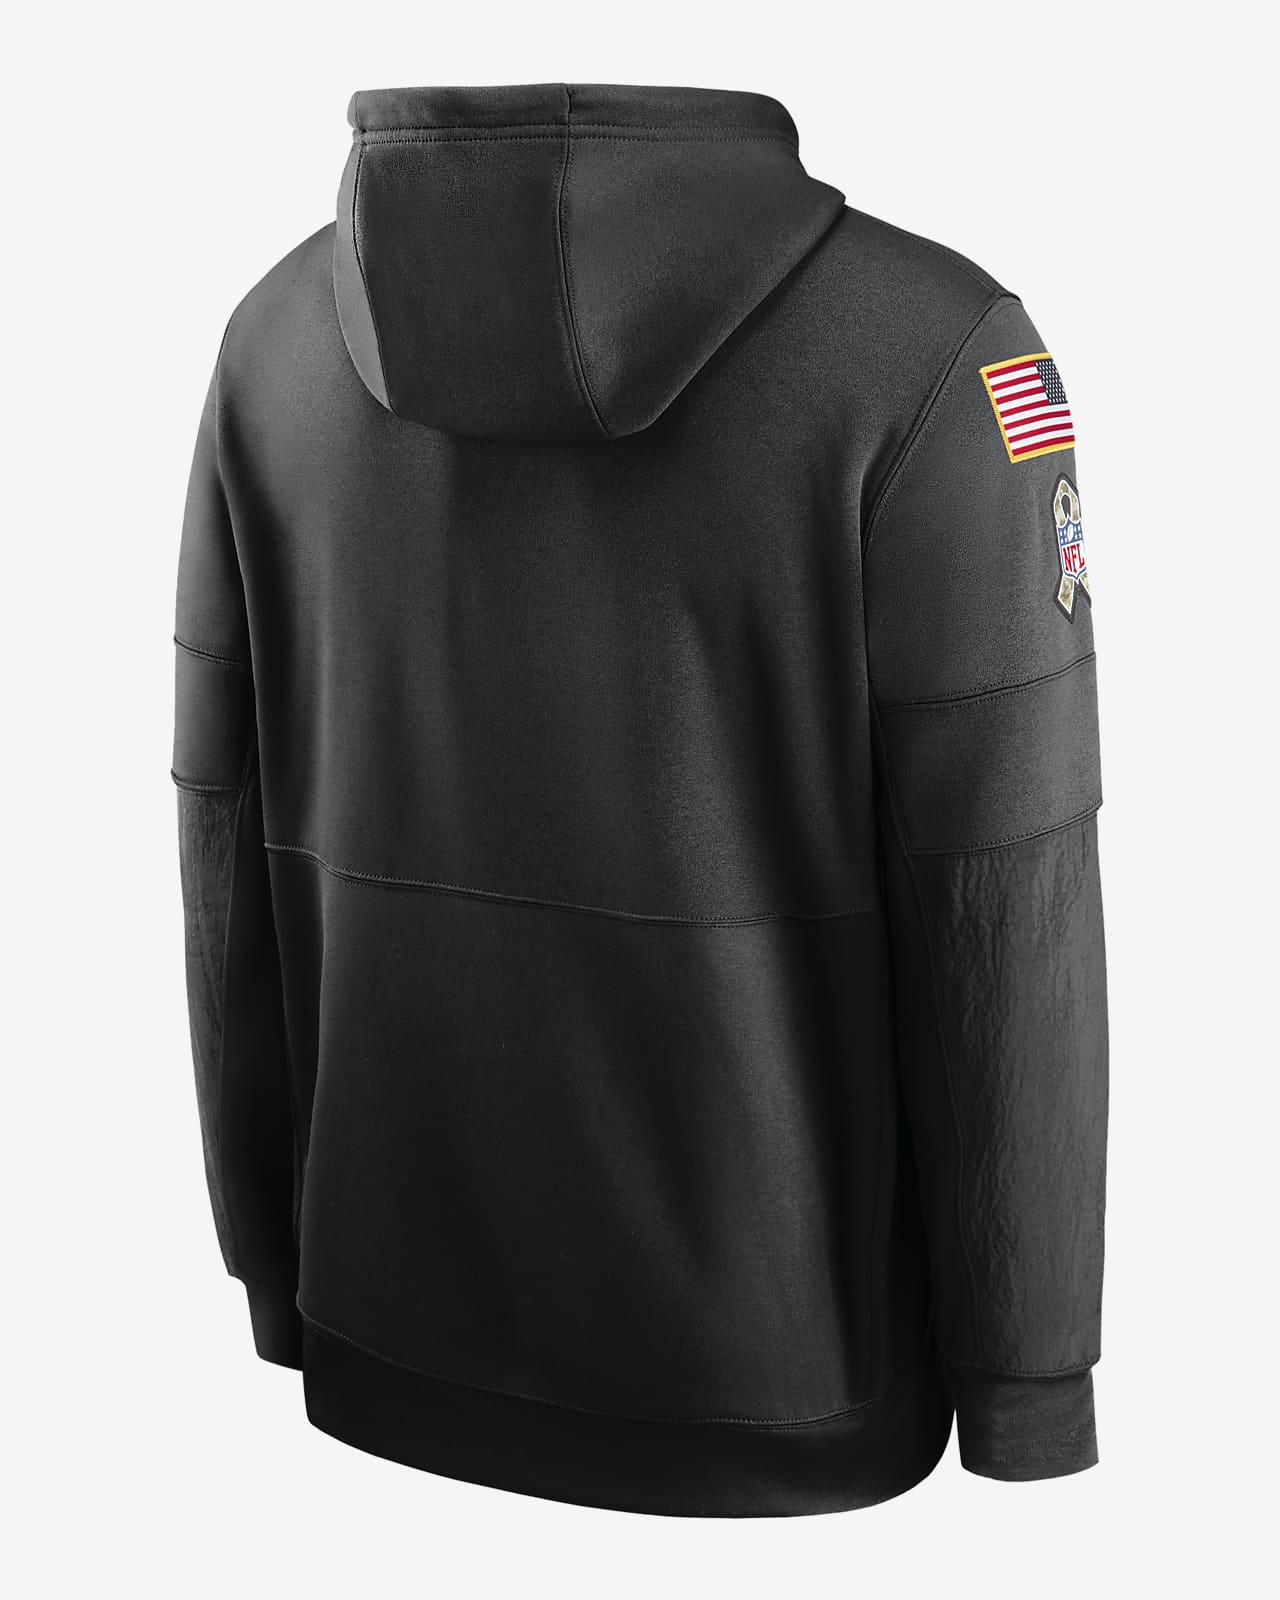 salute to service lions hoodie